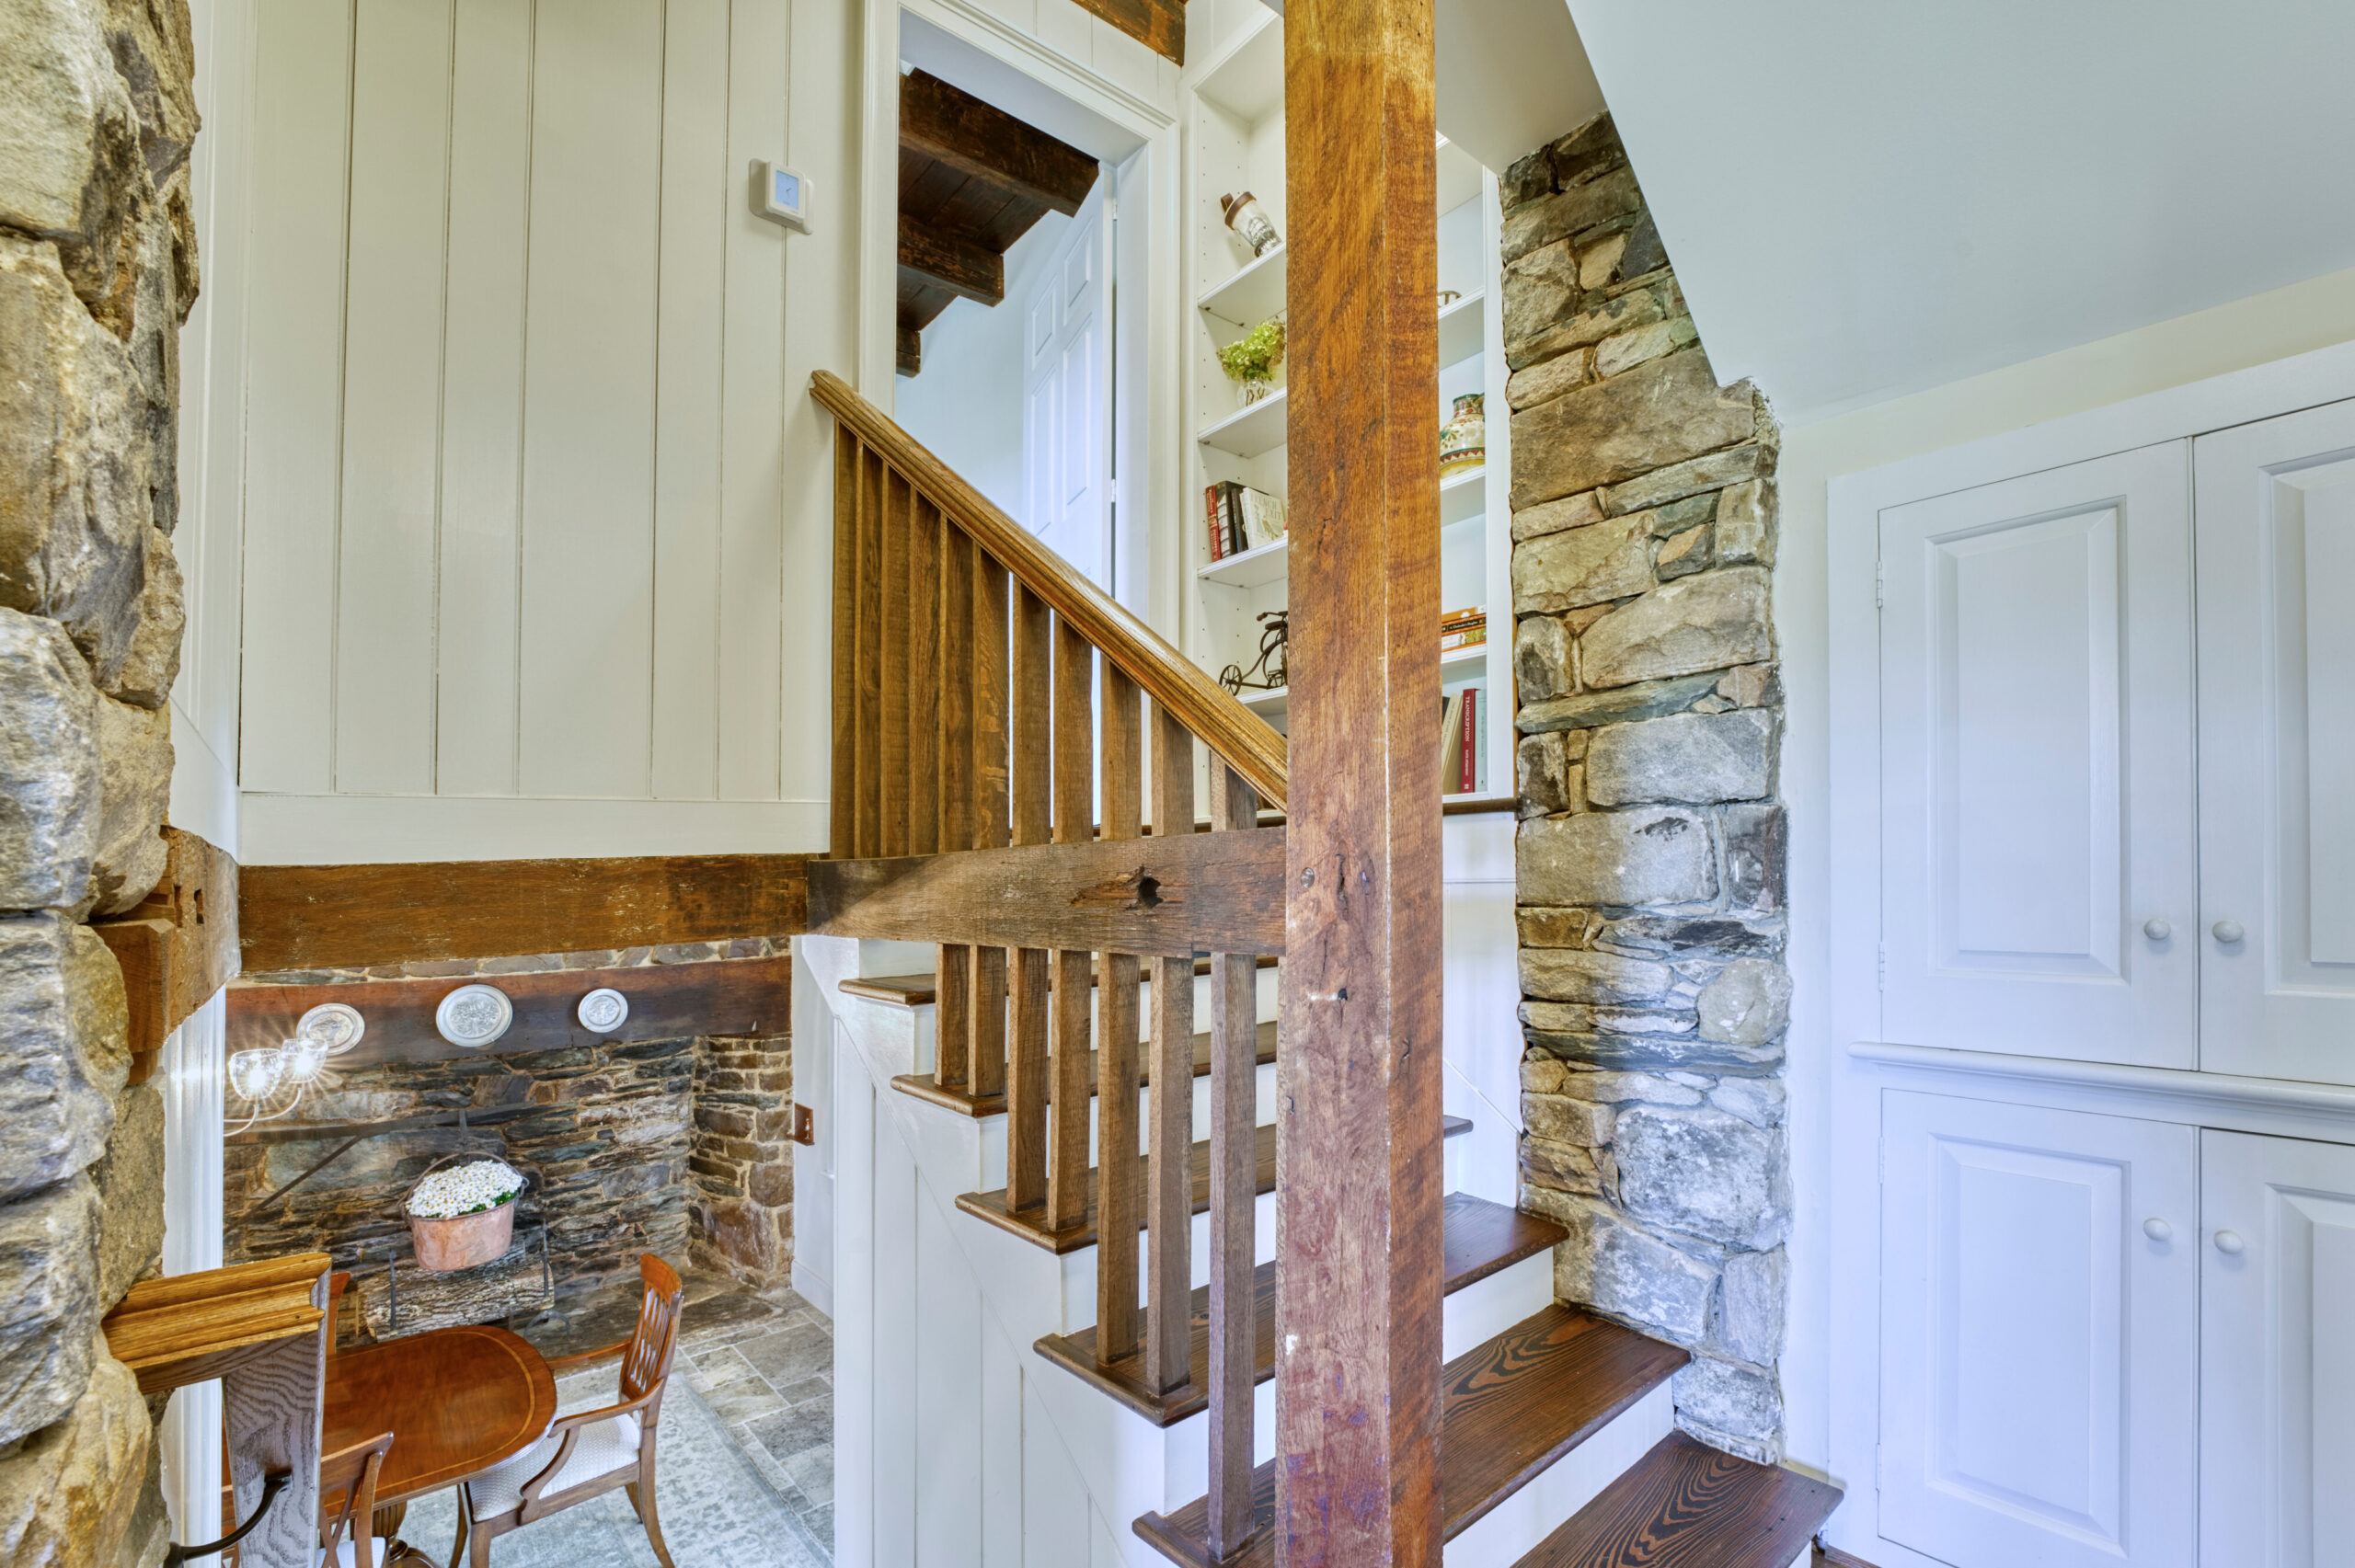 Professional interior photo of main house of Historic Hearthstone Manor: 35428 Appalachian Trail Rd, Round Hill, Virginia - showing staircase going up a split level, glimpse of formal dining room below